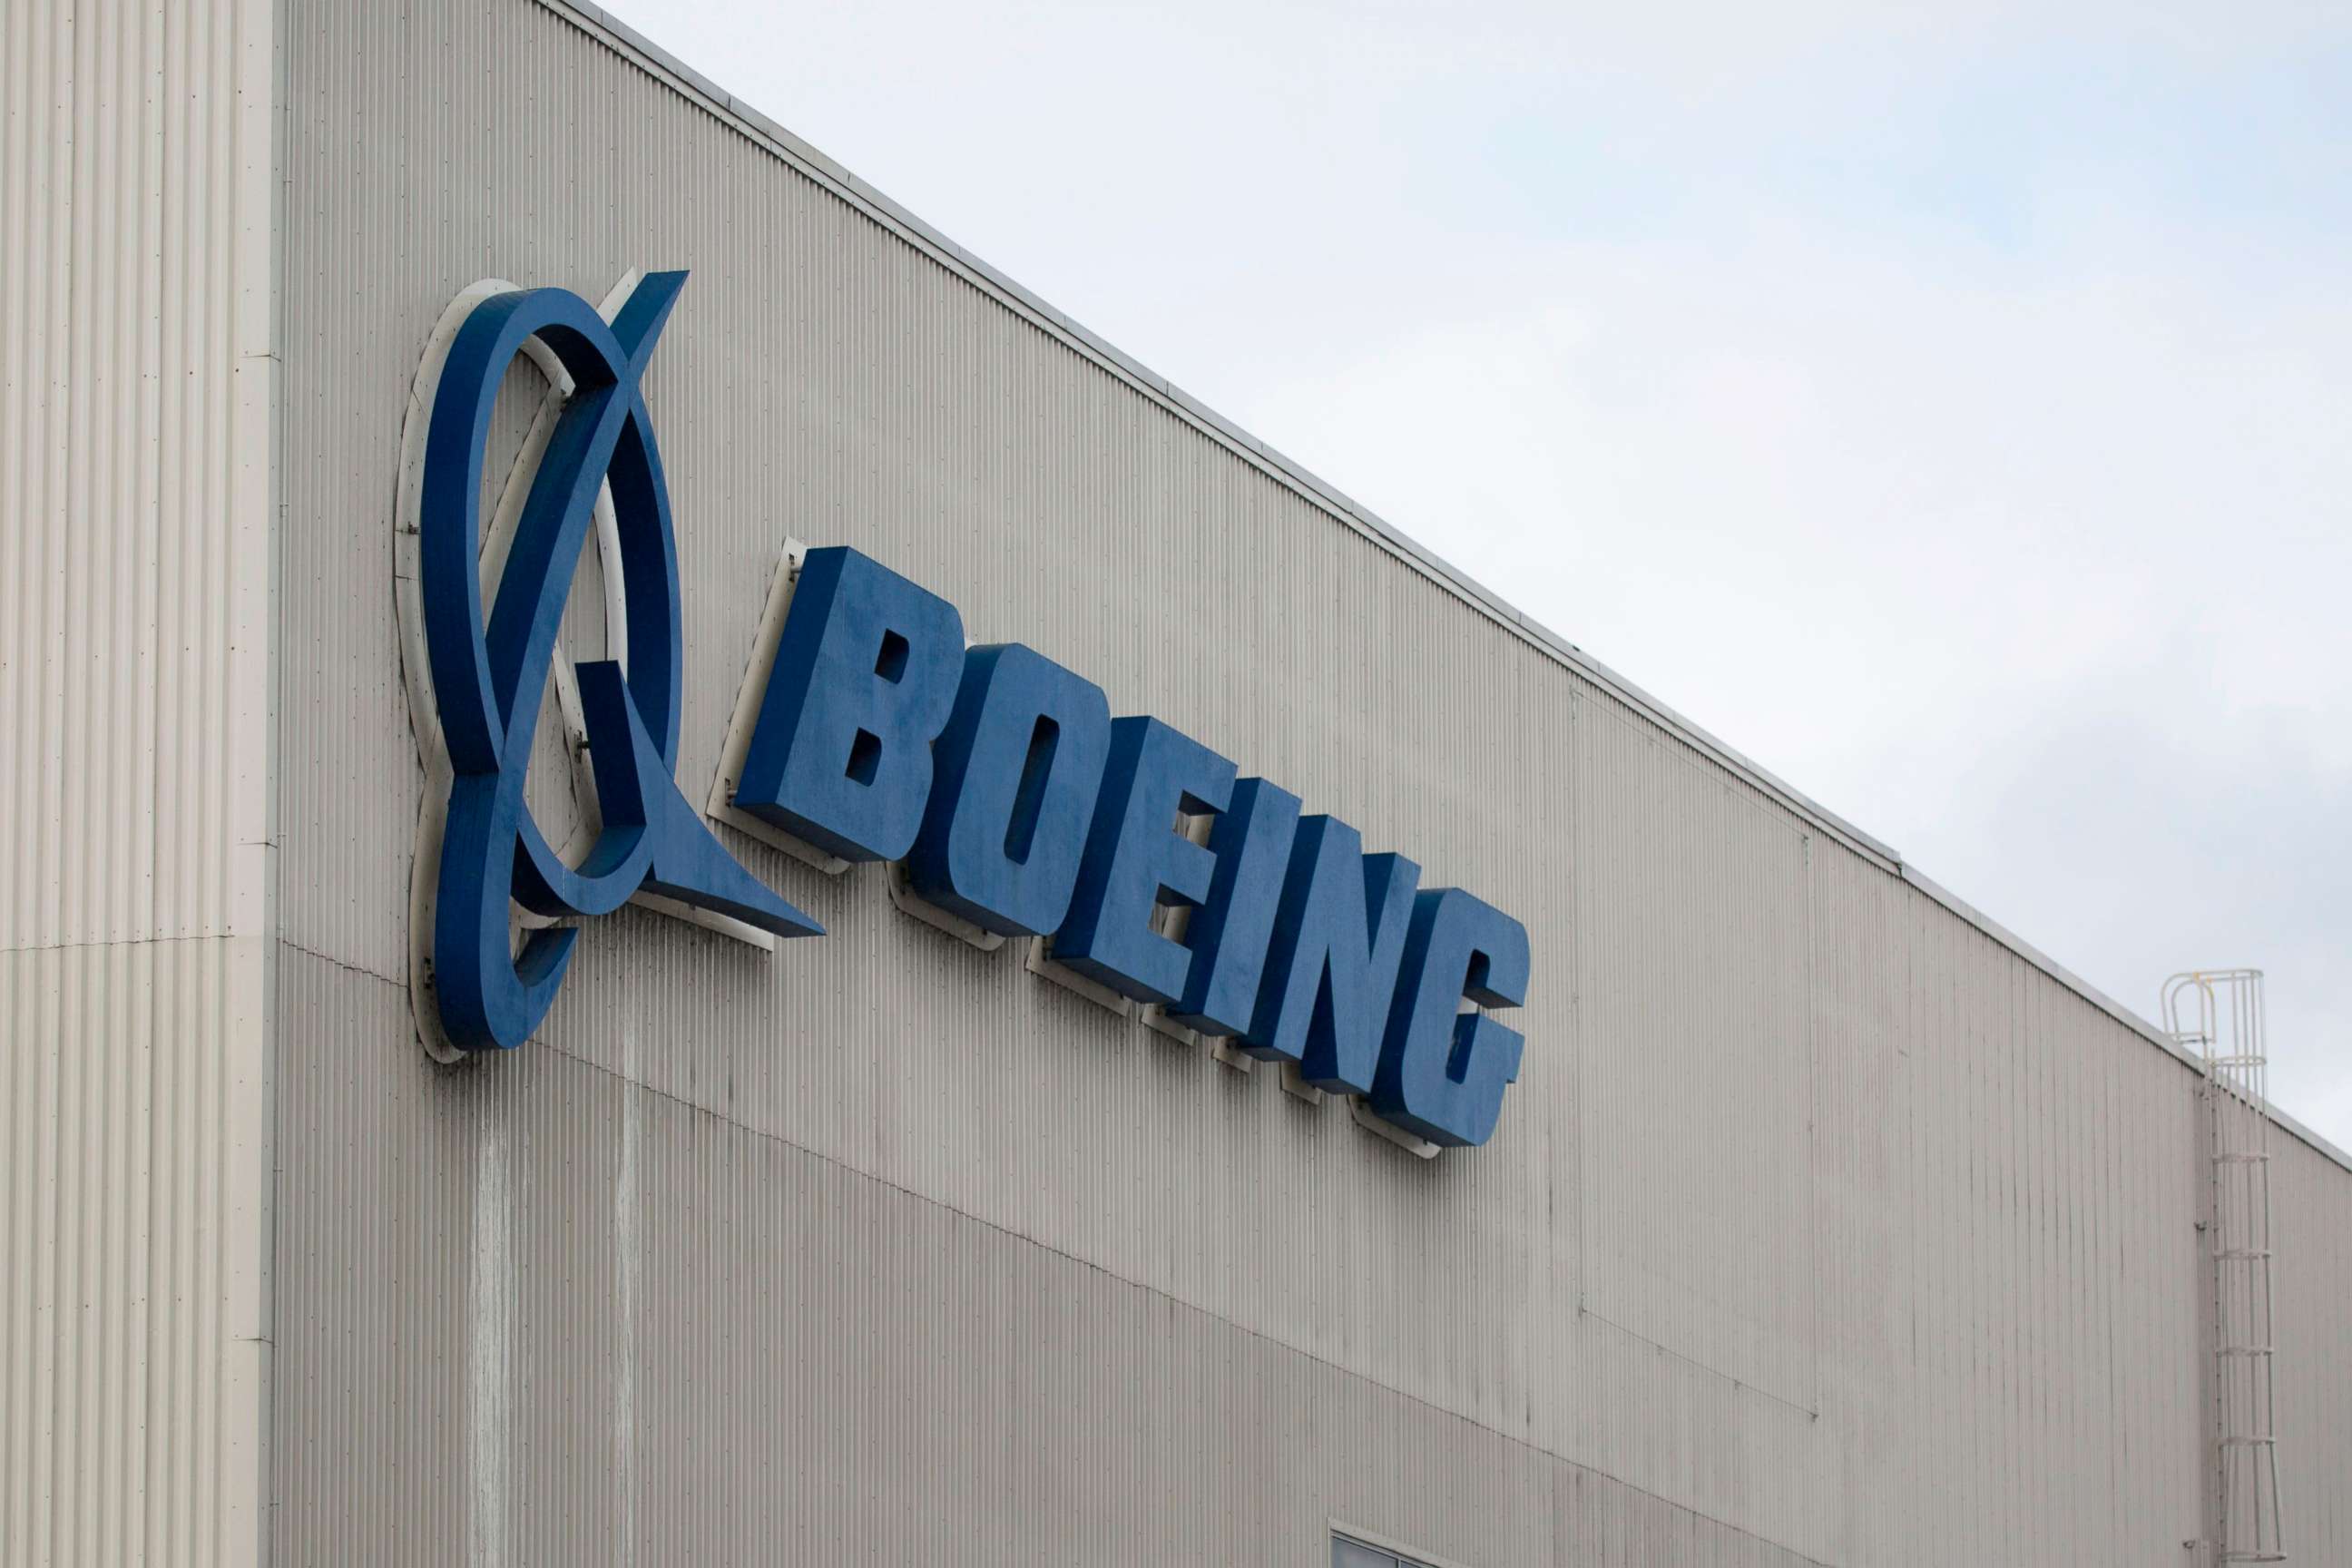 PHOTO: In this file photo taken on March 12, 2019 the Boeing logo is pictured at the Boeing Renton Factory in Renton, Wash.